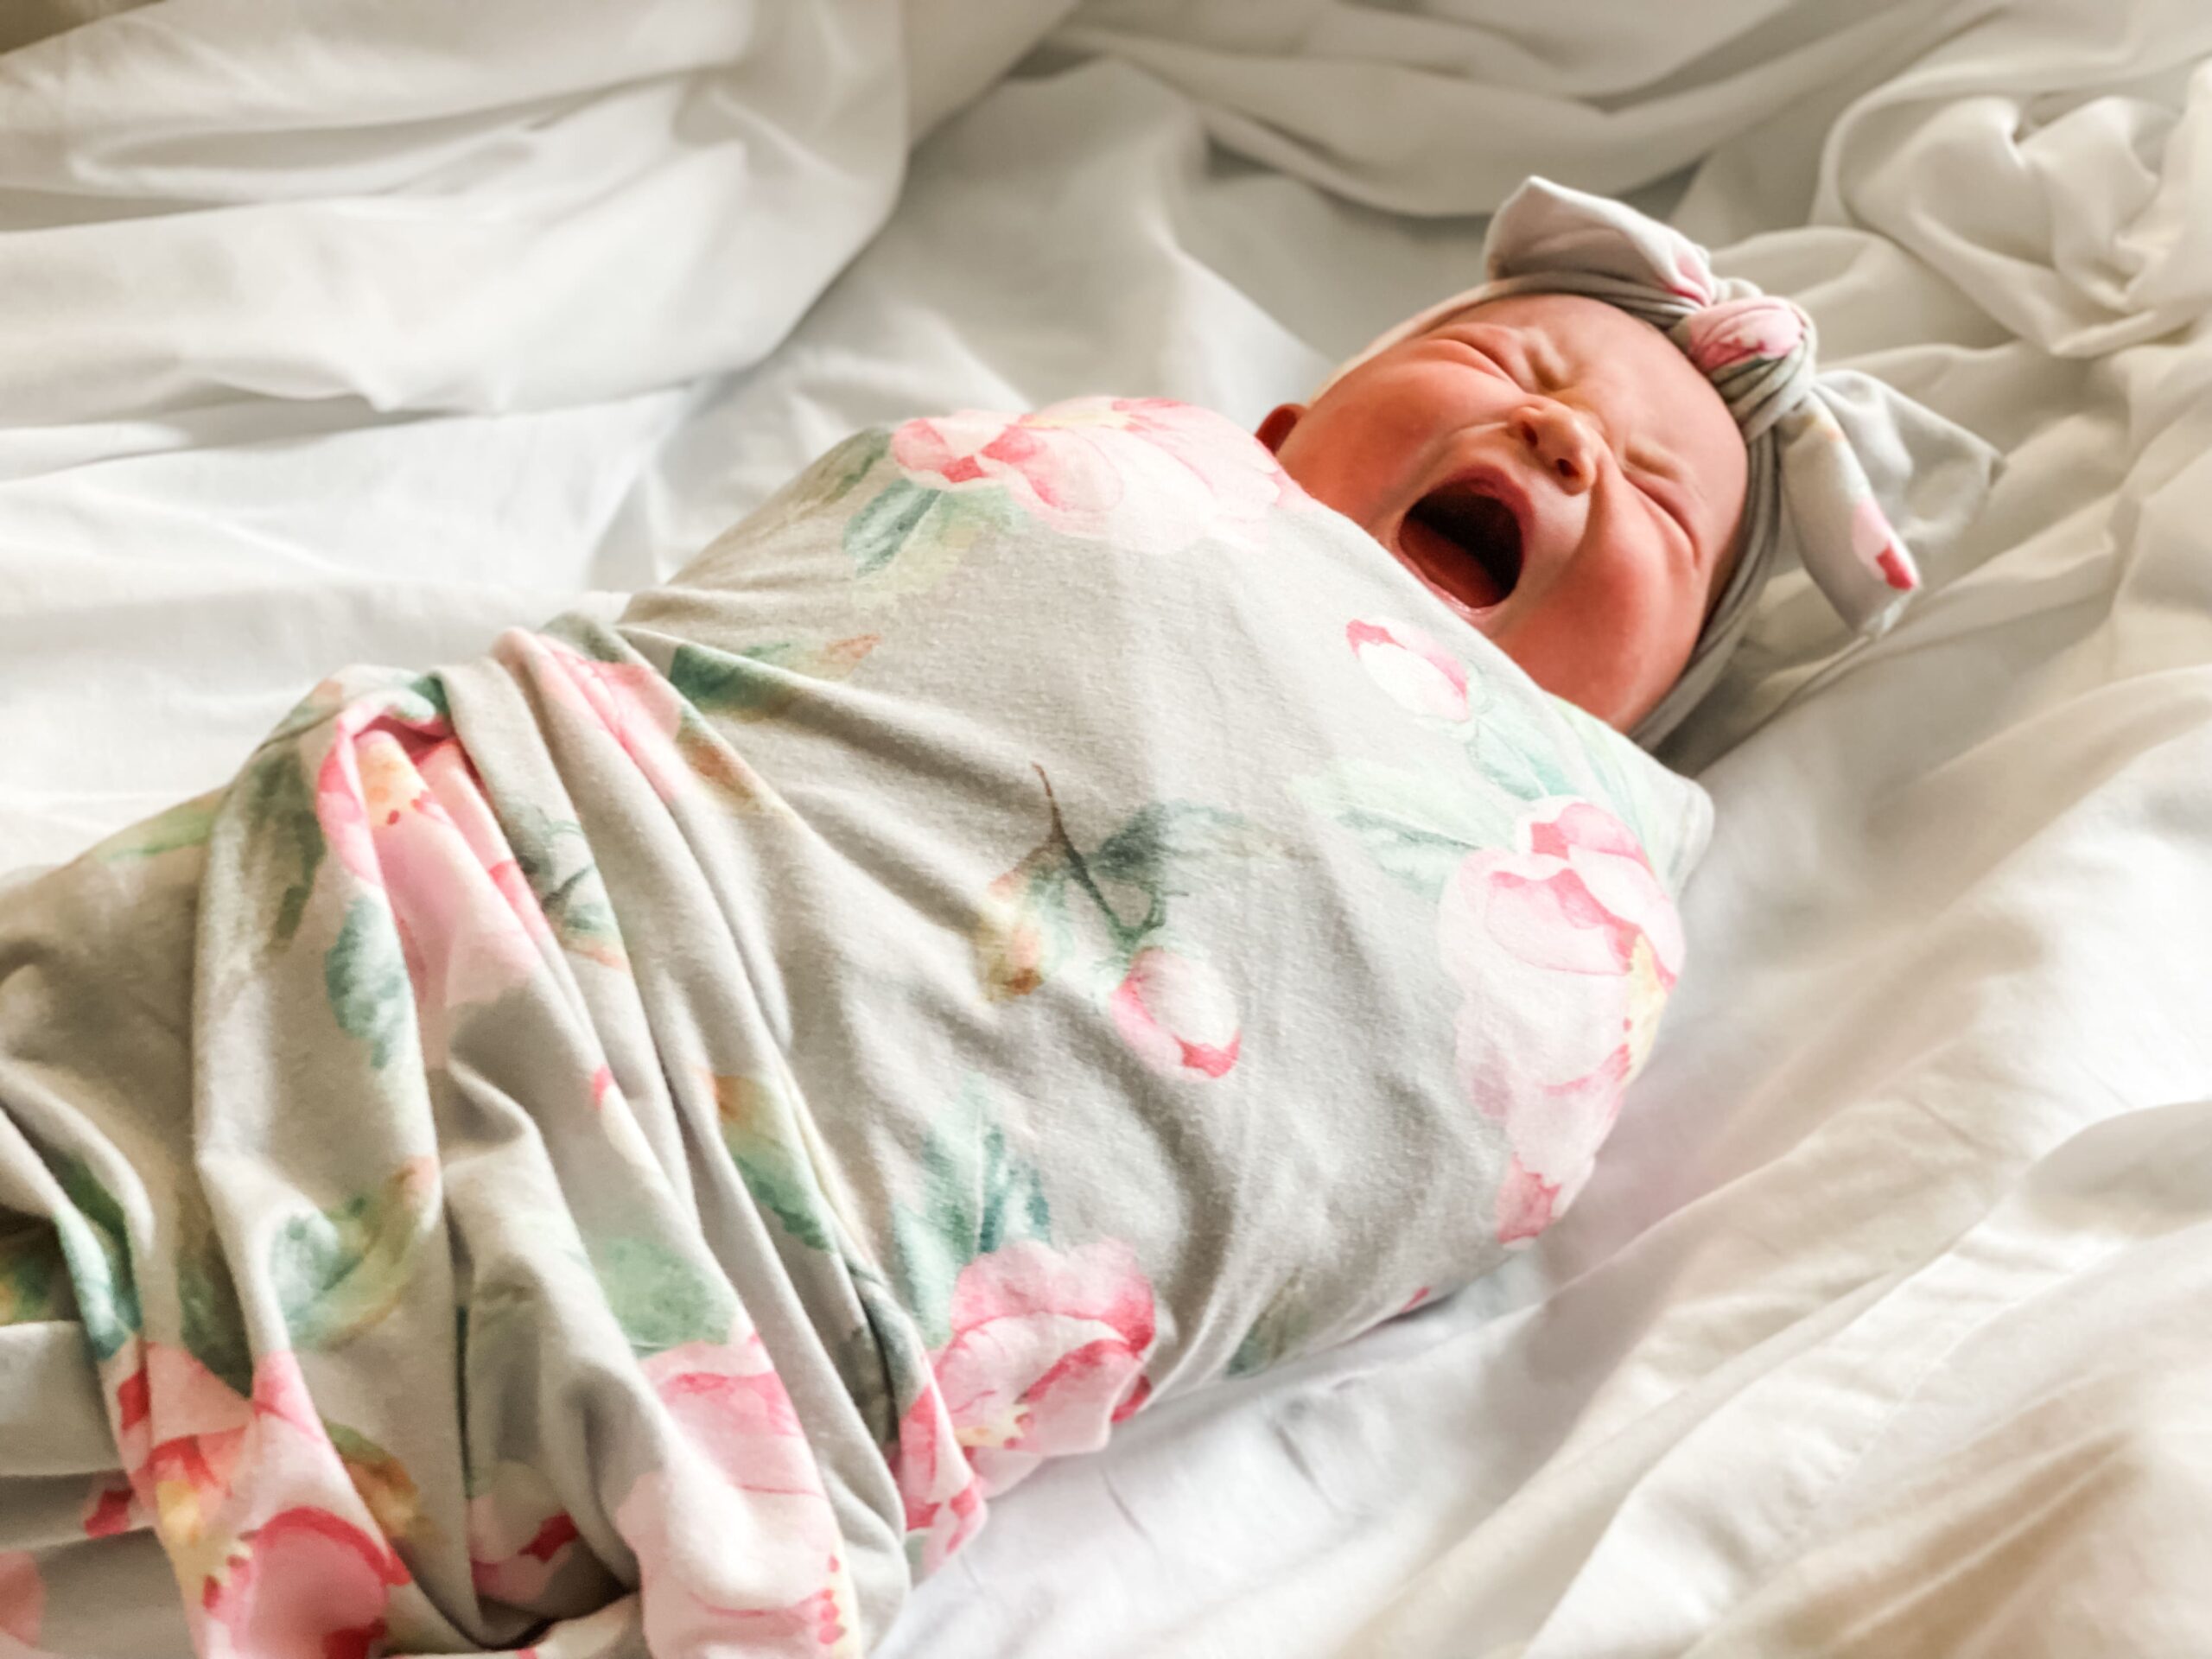 swaddled newborn baby yawning in bed